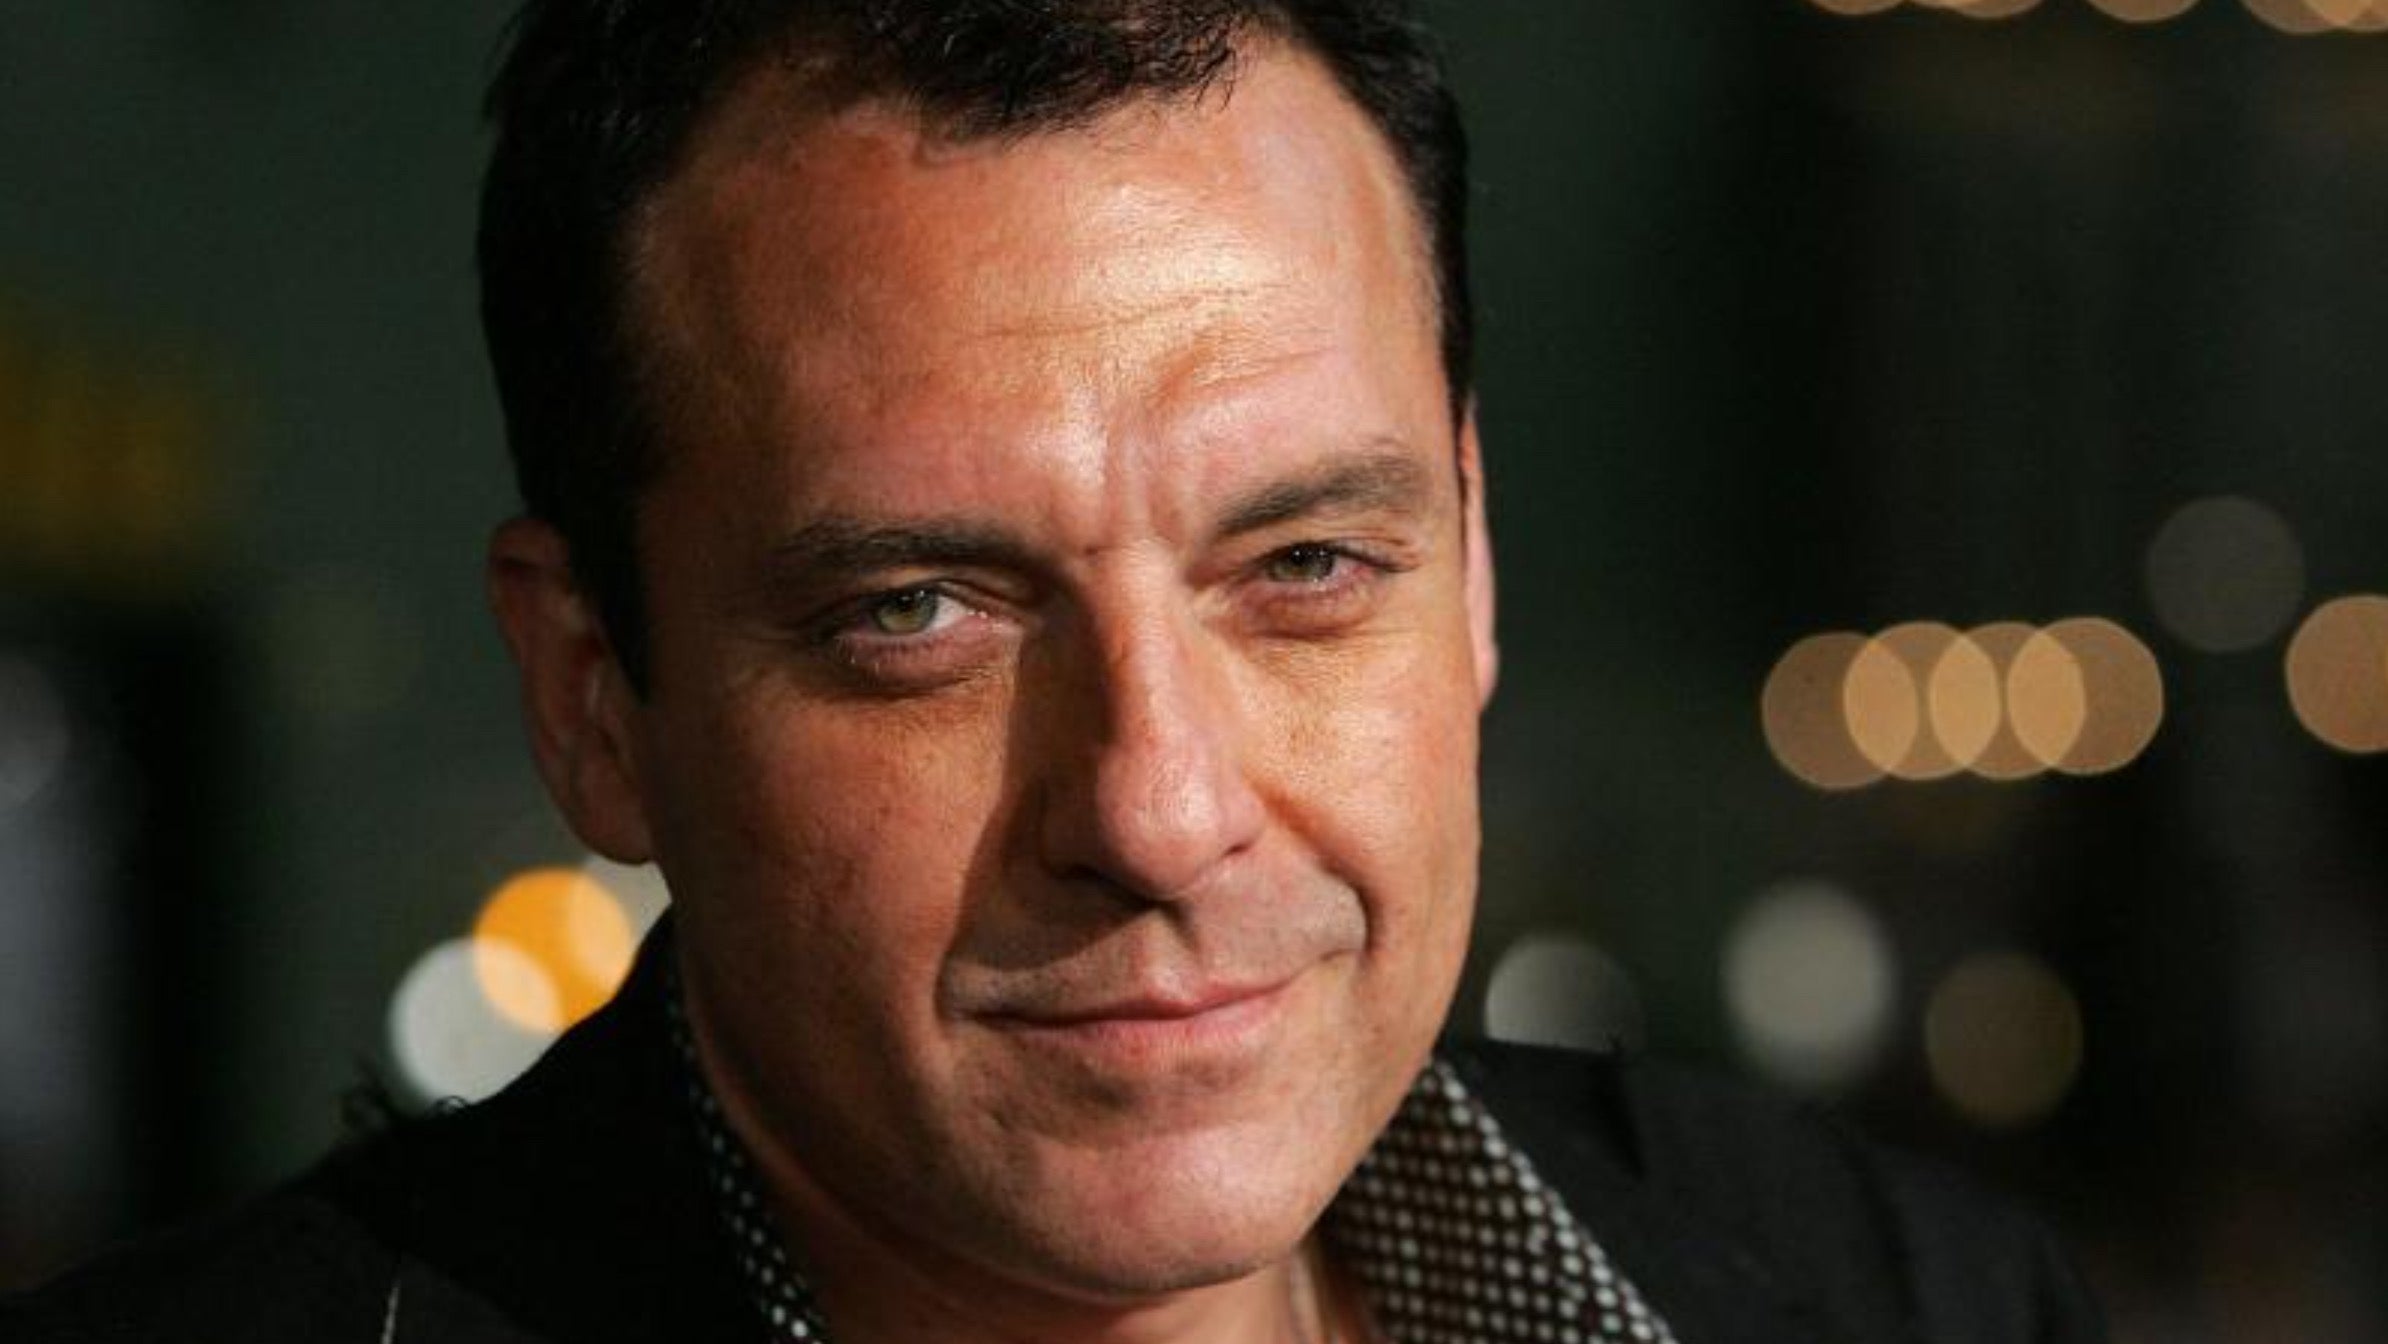 The actor Tom Sizemore, known for his roles in Pearl Harbor or Saving Private Ryan, died at 61 years, Magnate Daily